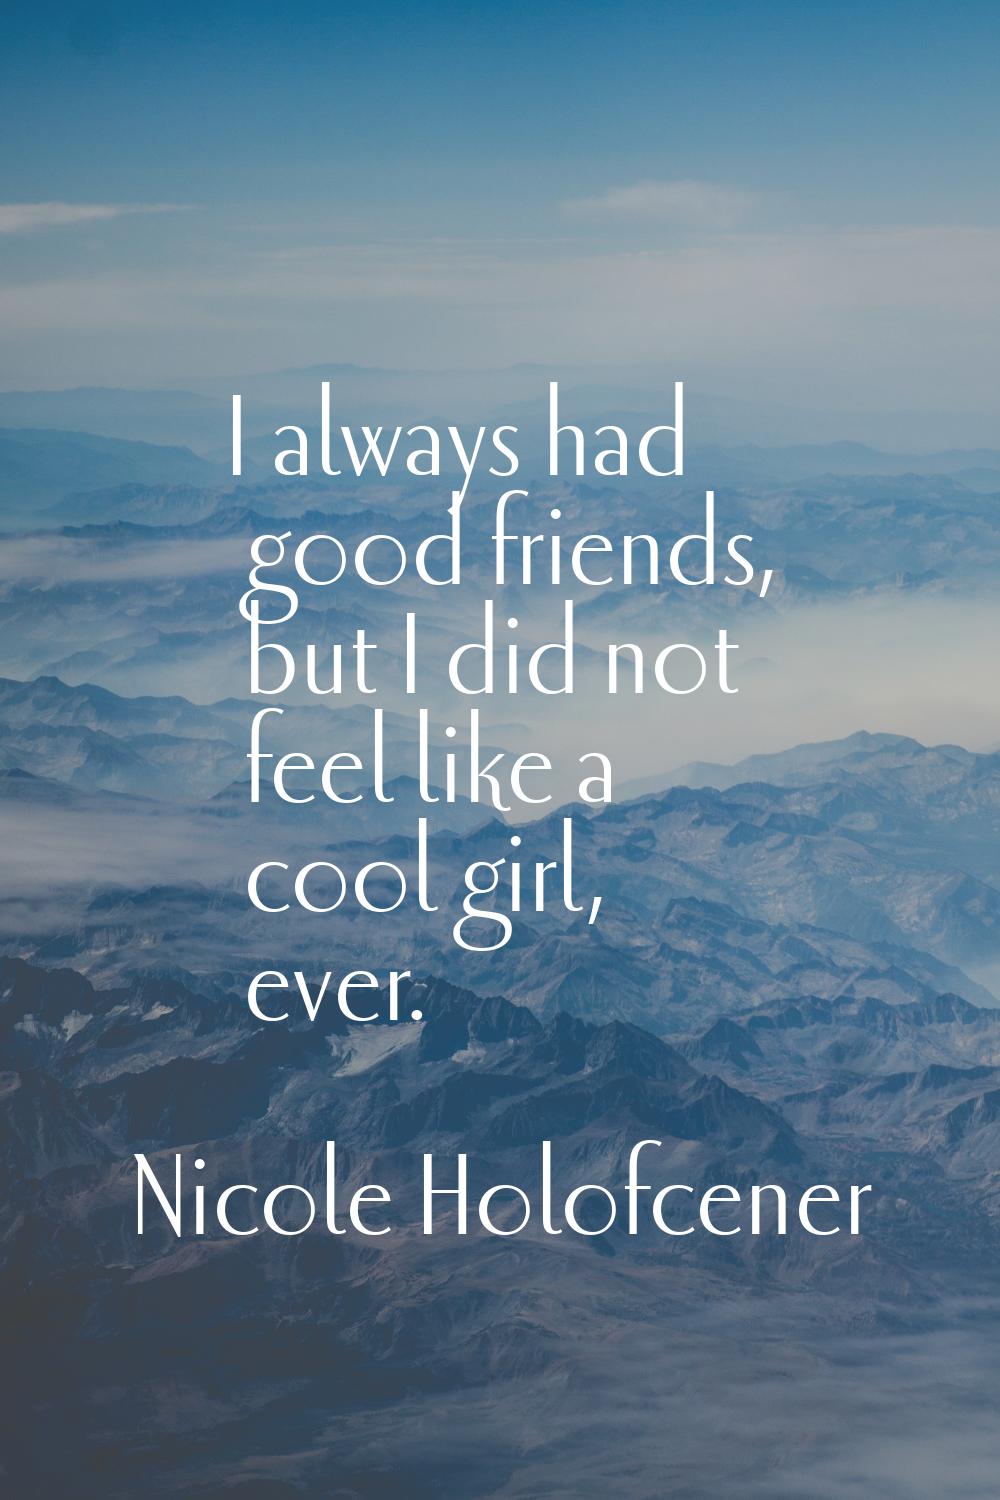 I always had good friends, but I did not feel like a cool girl, ever.